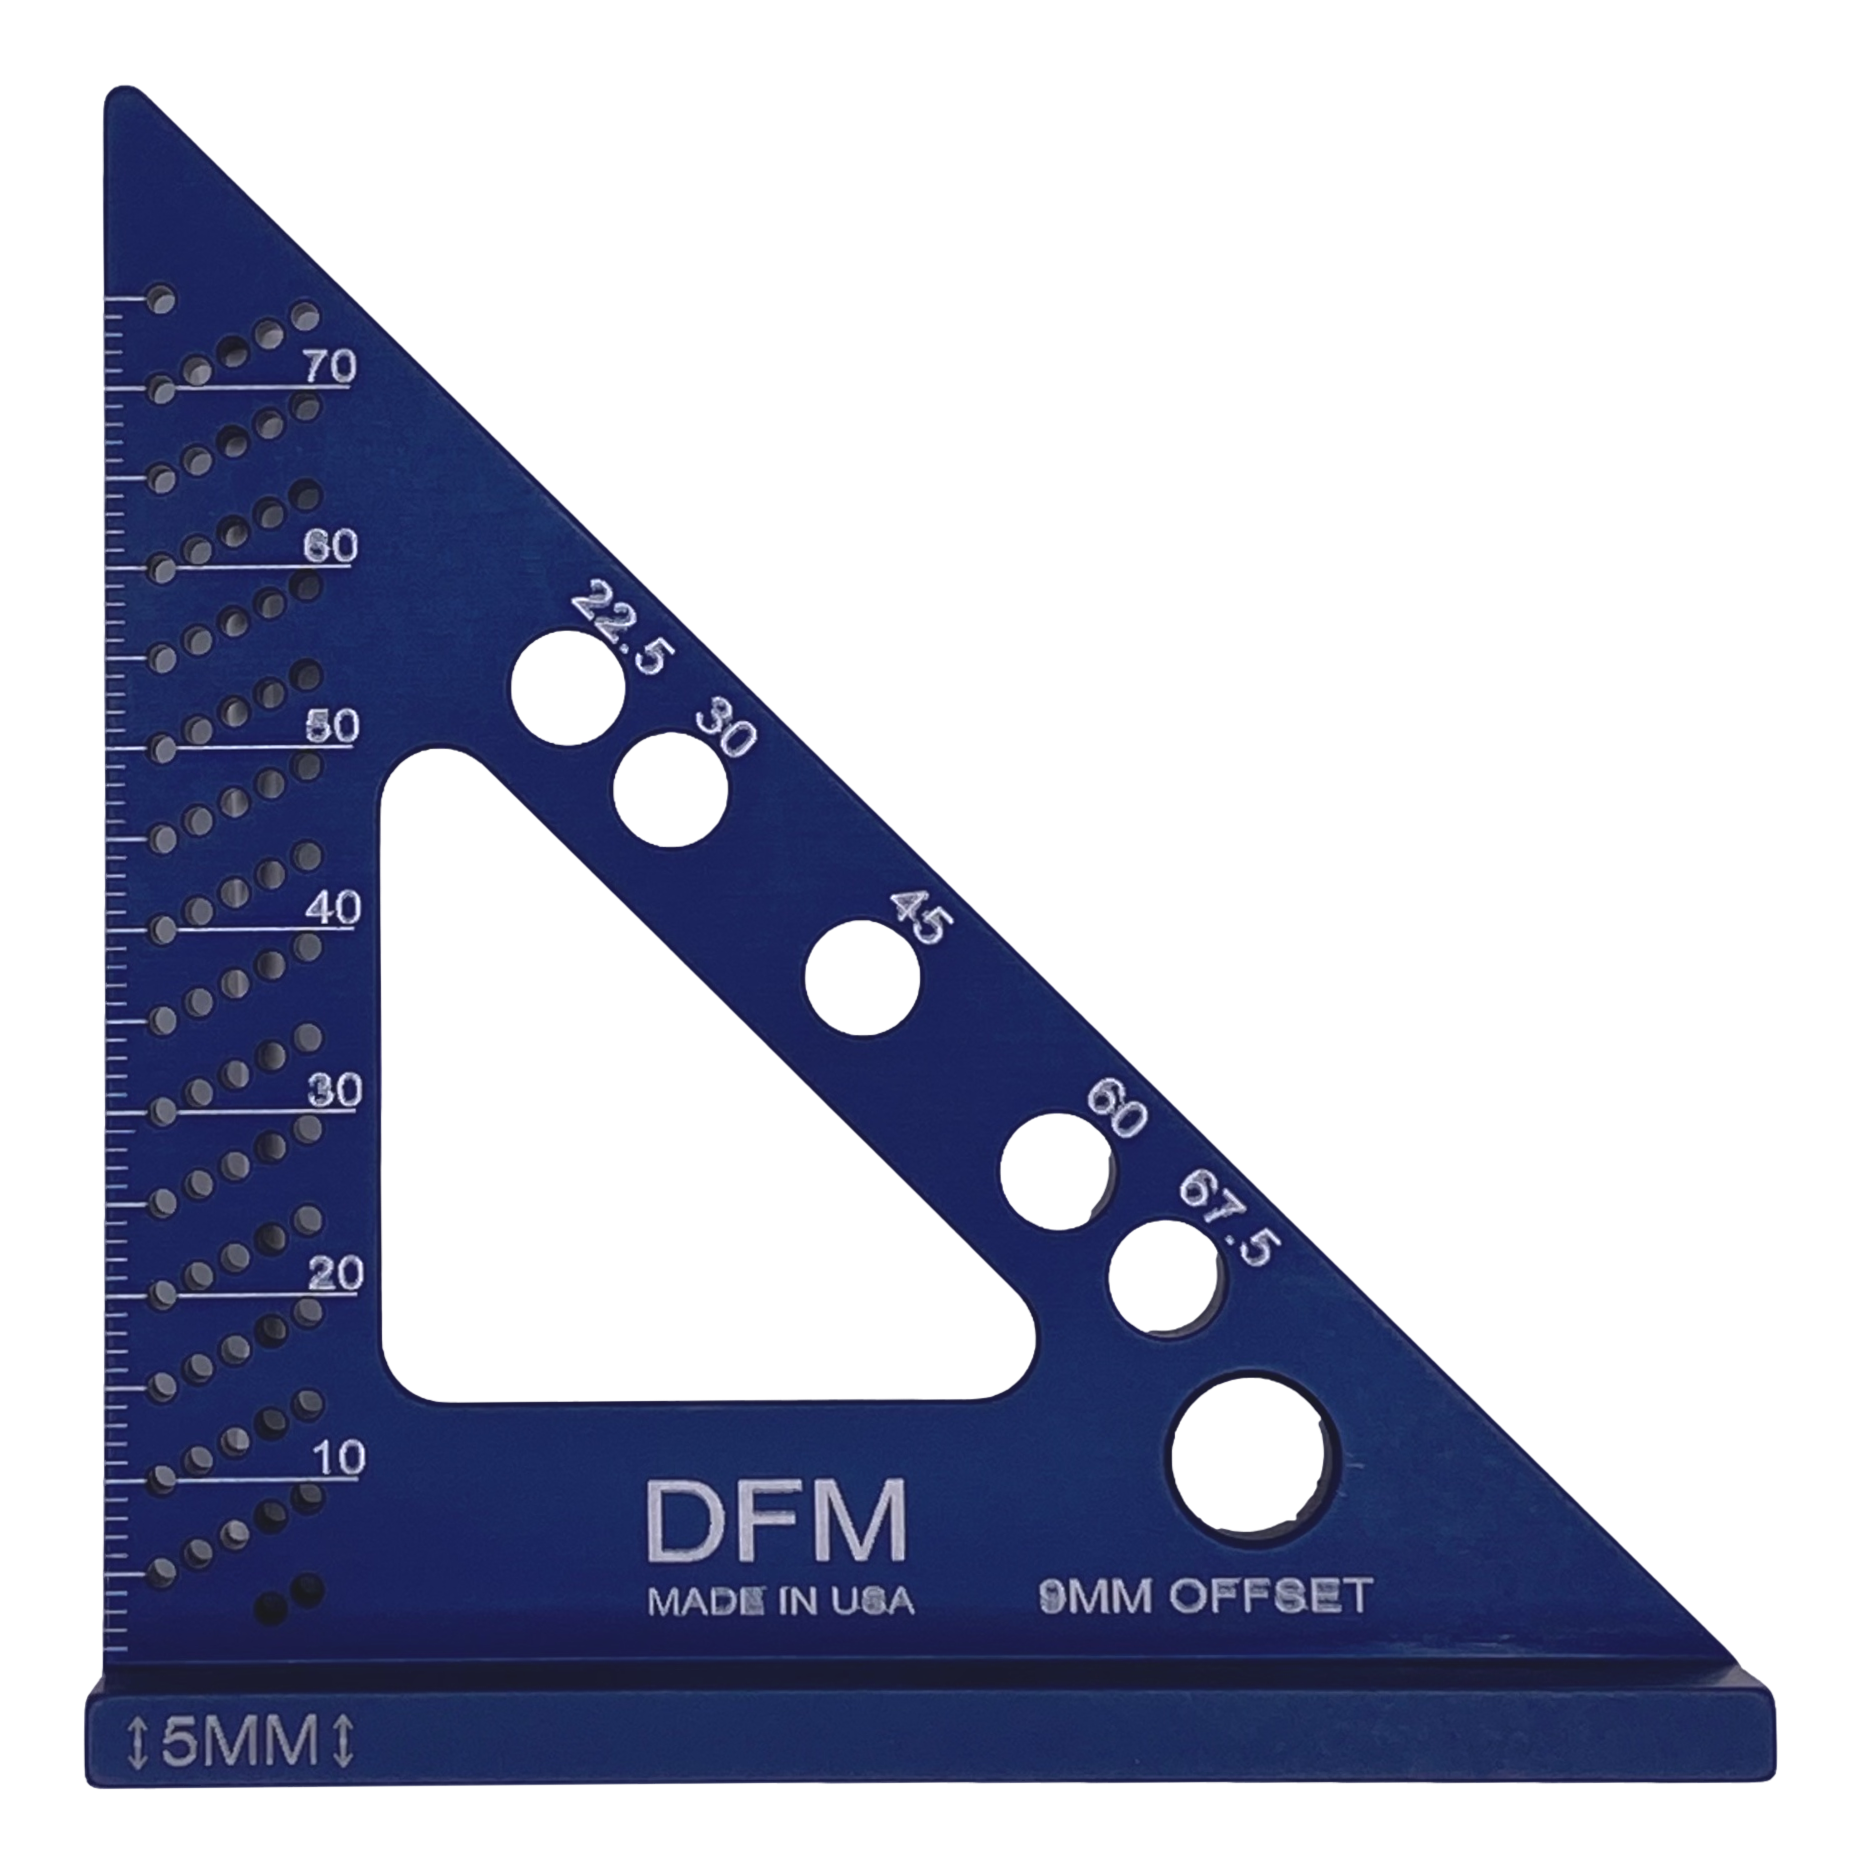 Rm Products Military Protractor Square